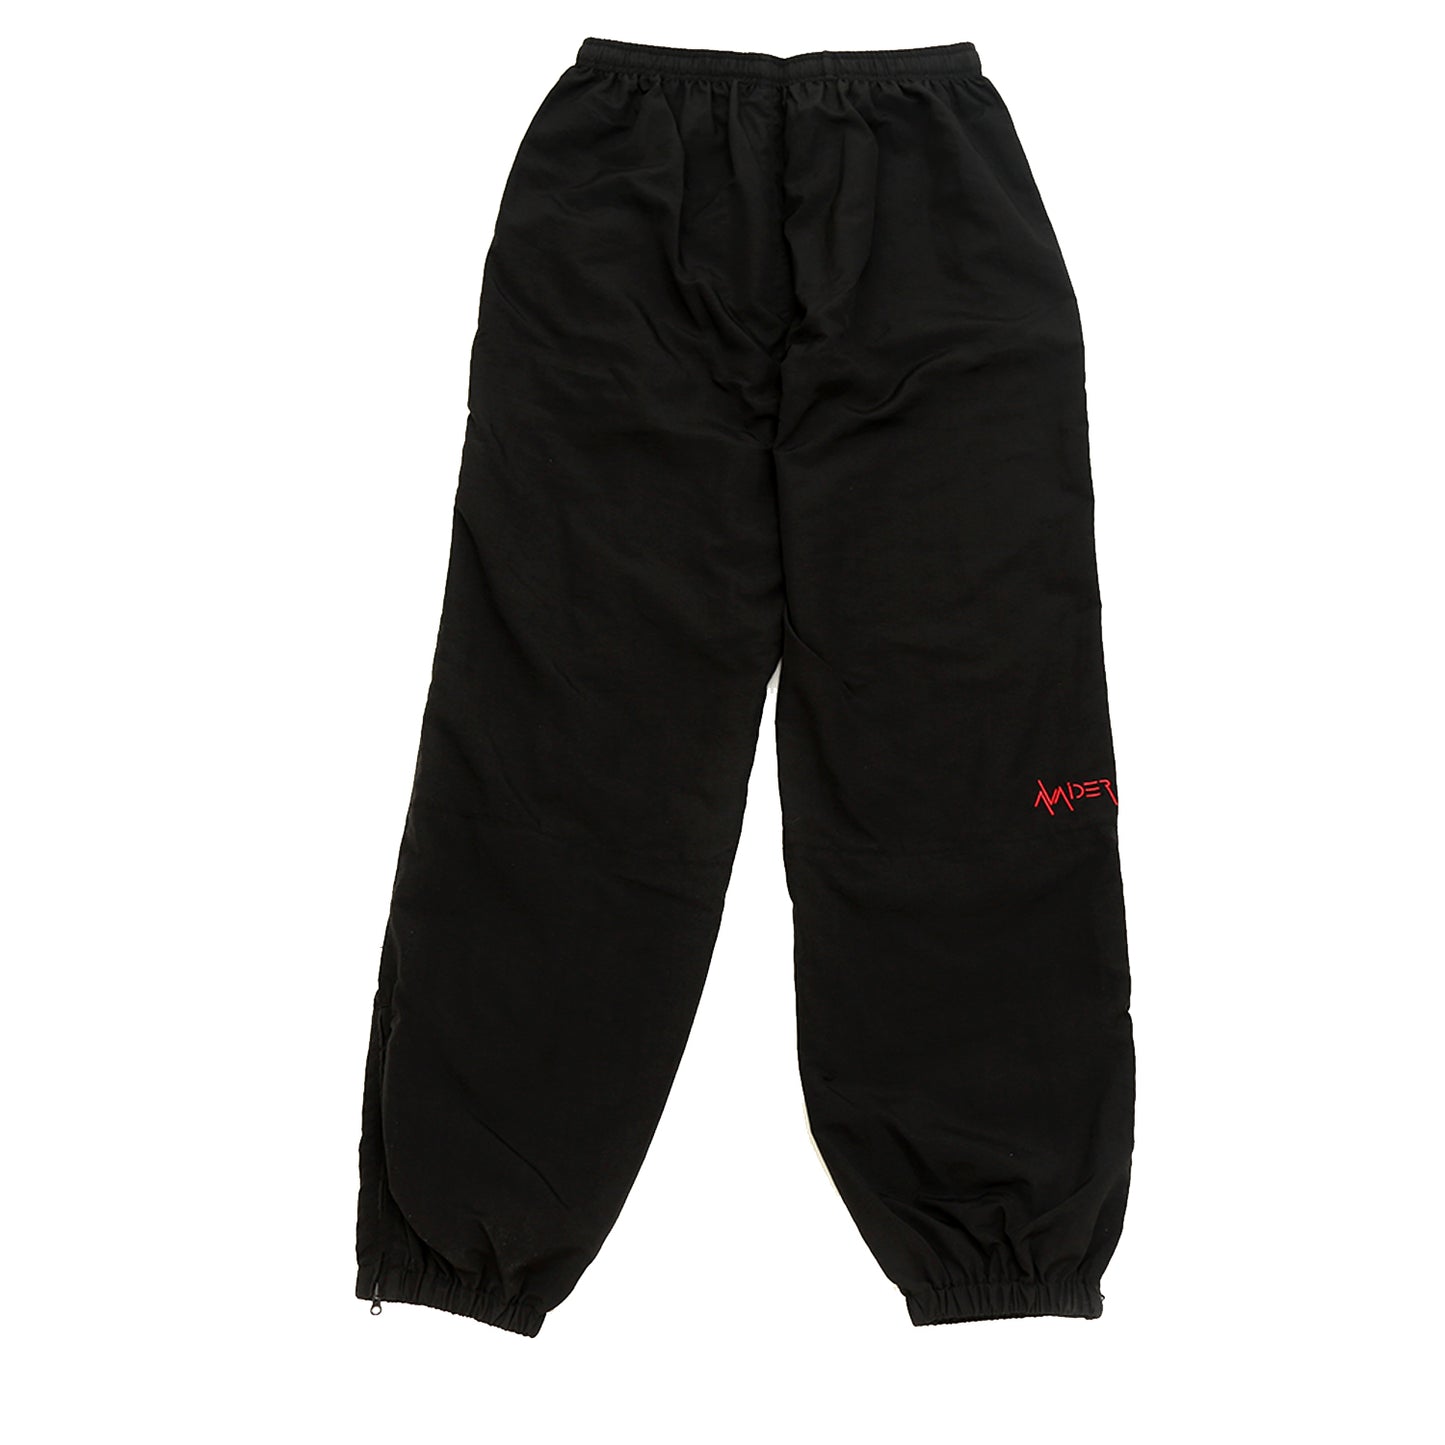 BASECAMP RUNNING WOVEN TRACK PANT IN BLACK AND  RED